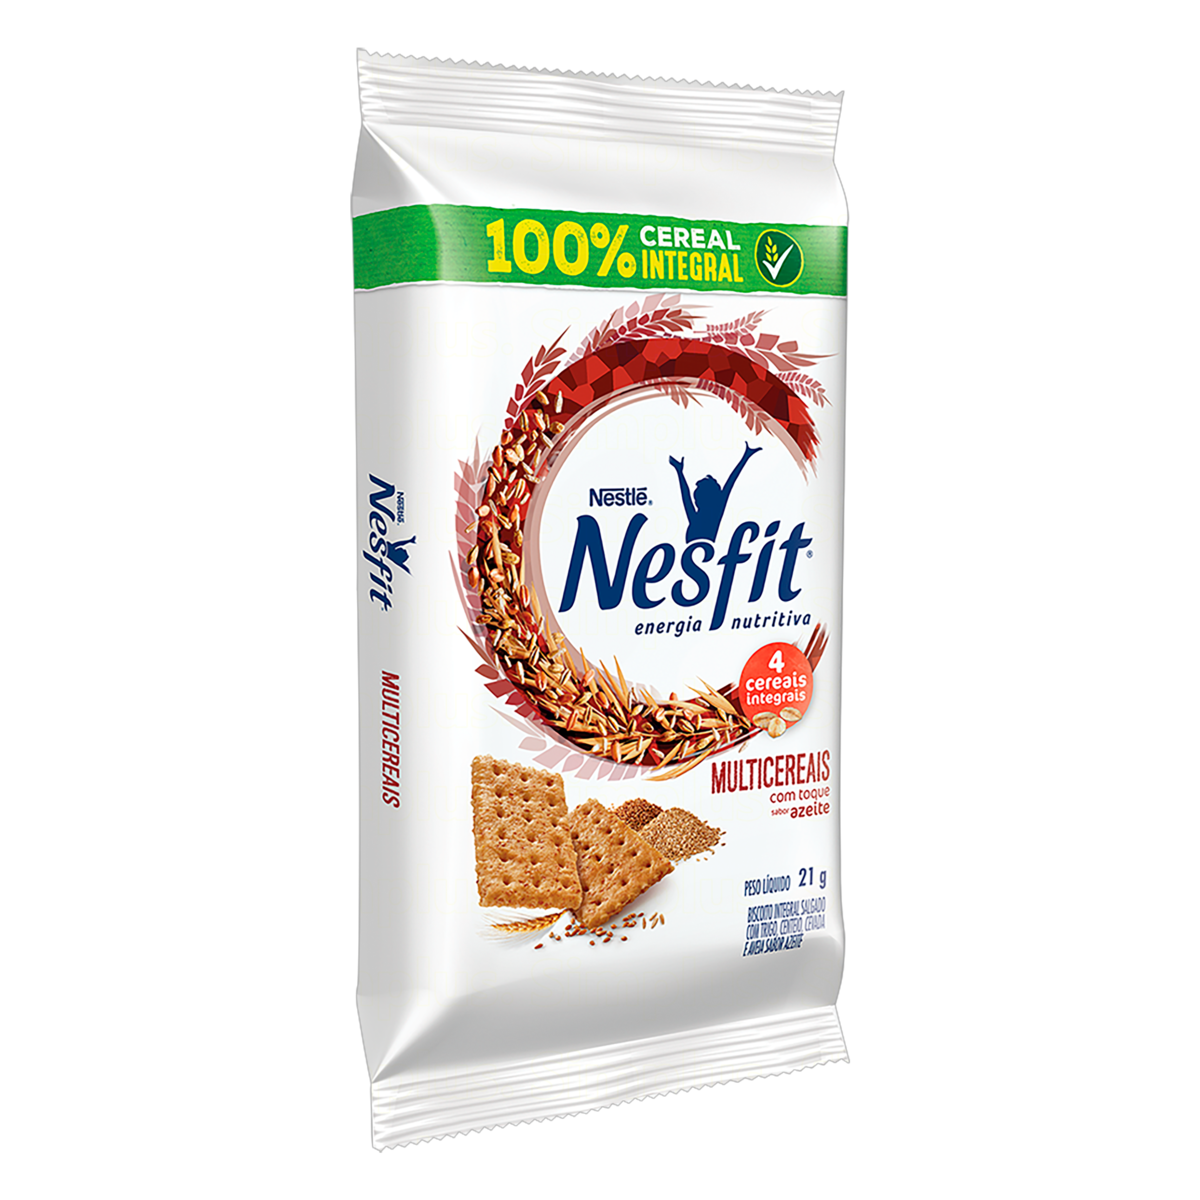 7891000068441 - PACK BISCOITO INTEGRAL MULTICEREAIS NESFIT PACOTE 126G 6 UNIDADES